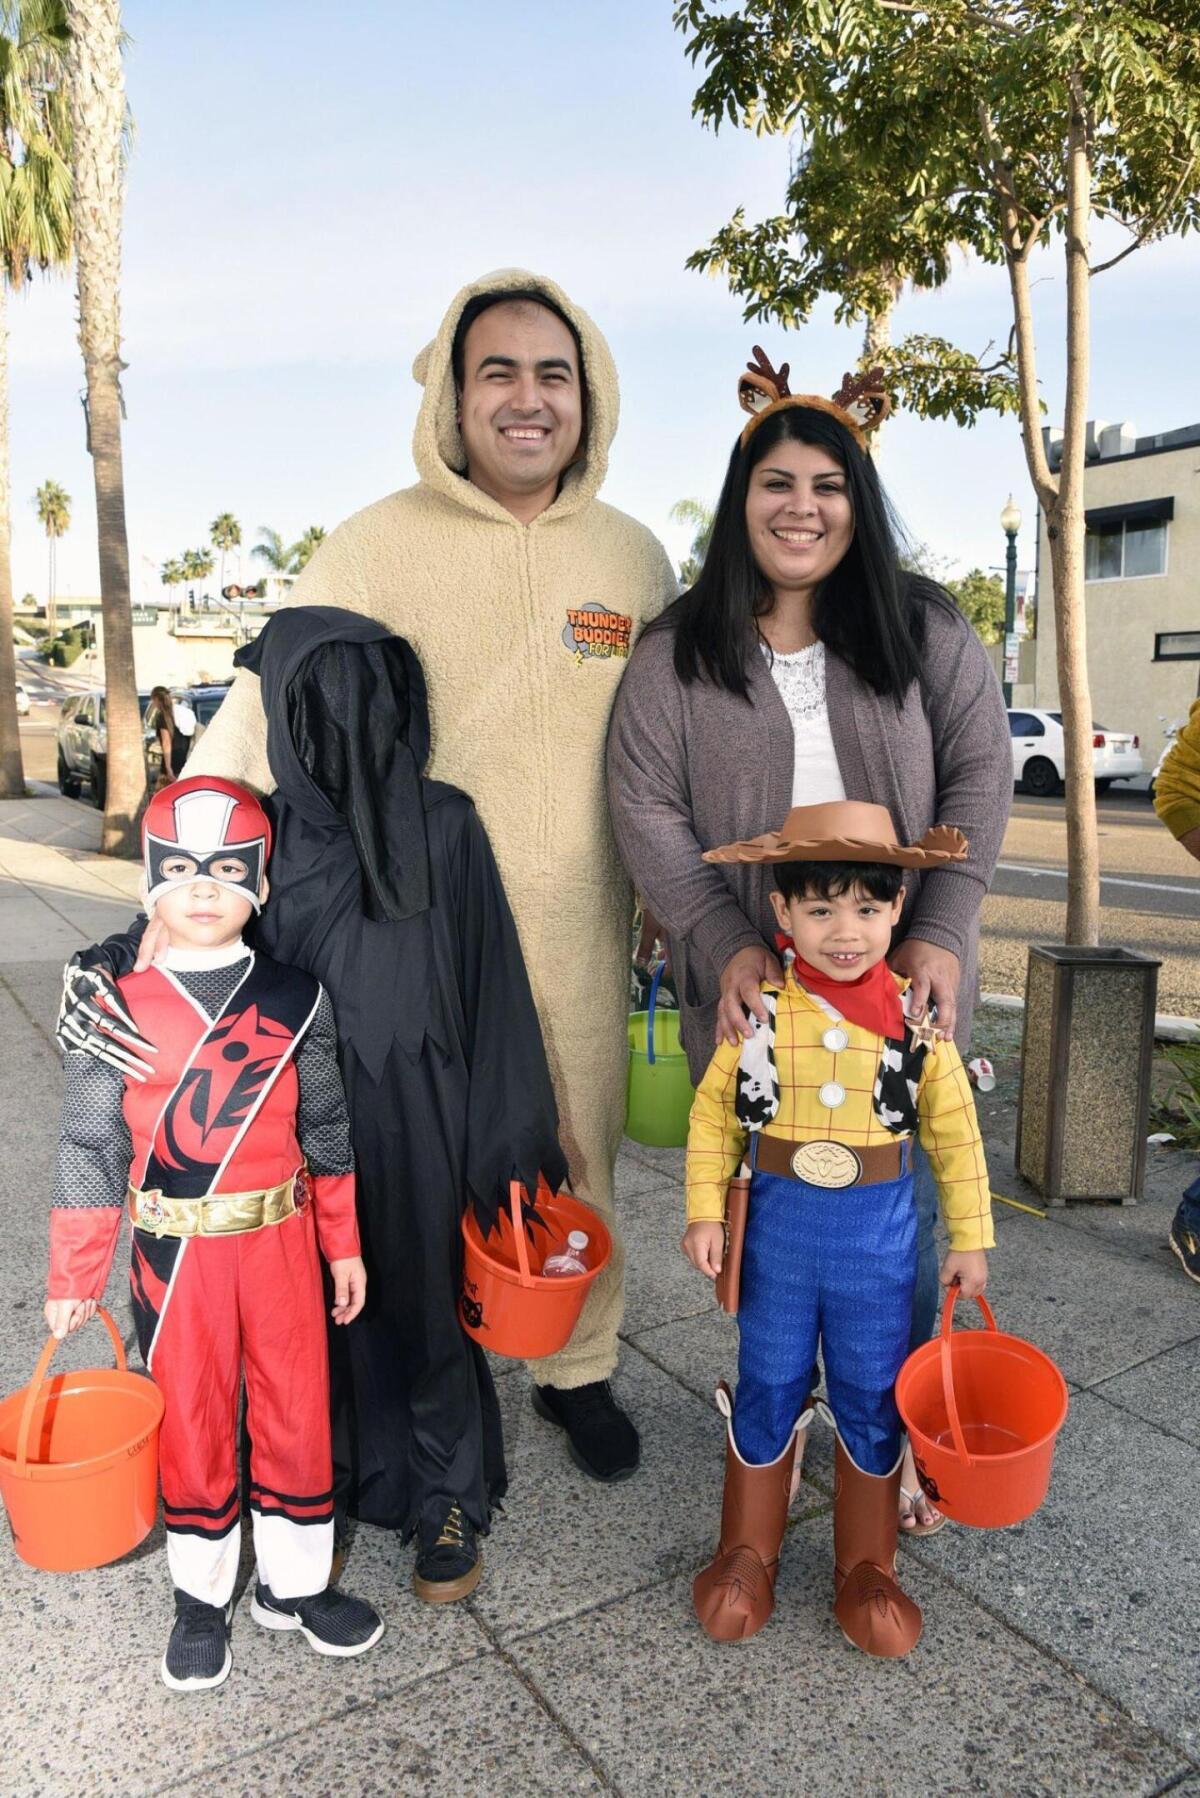 Participants at a previous Safe Trick or Treat event.